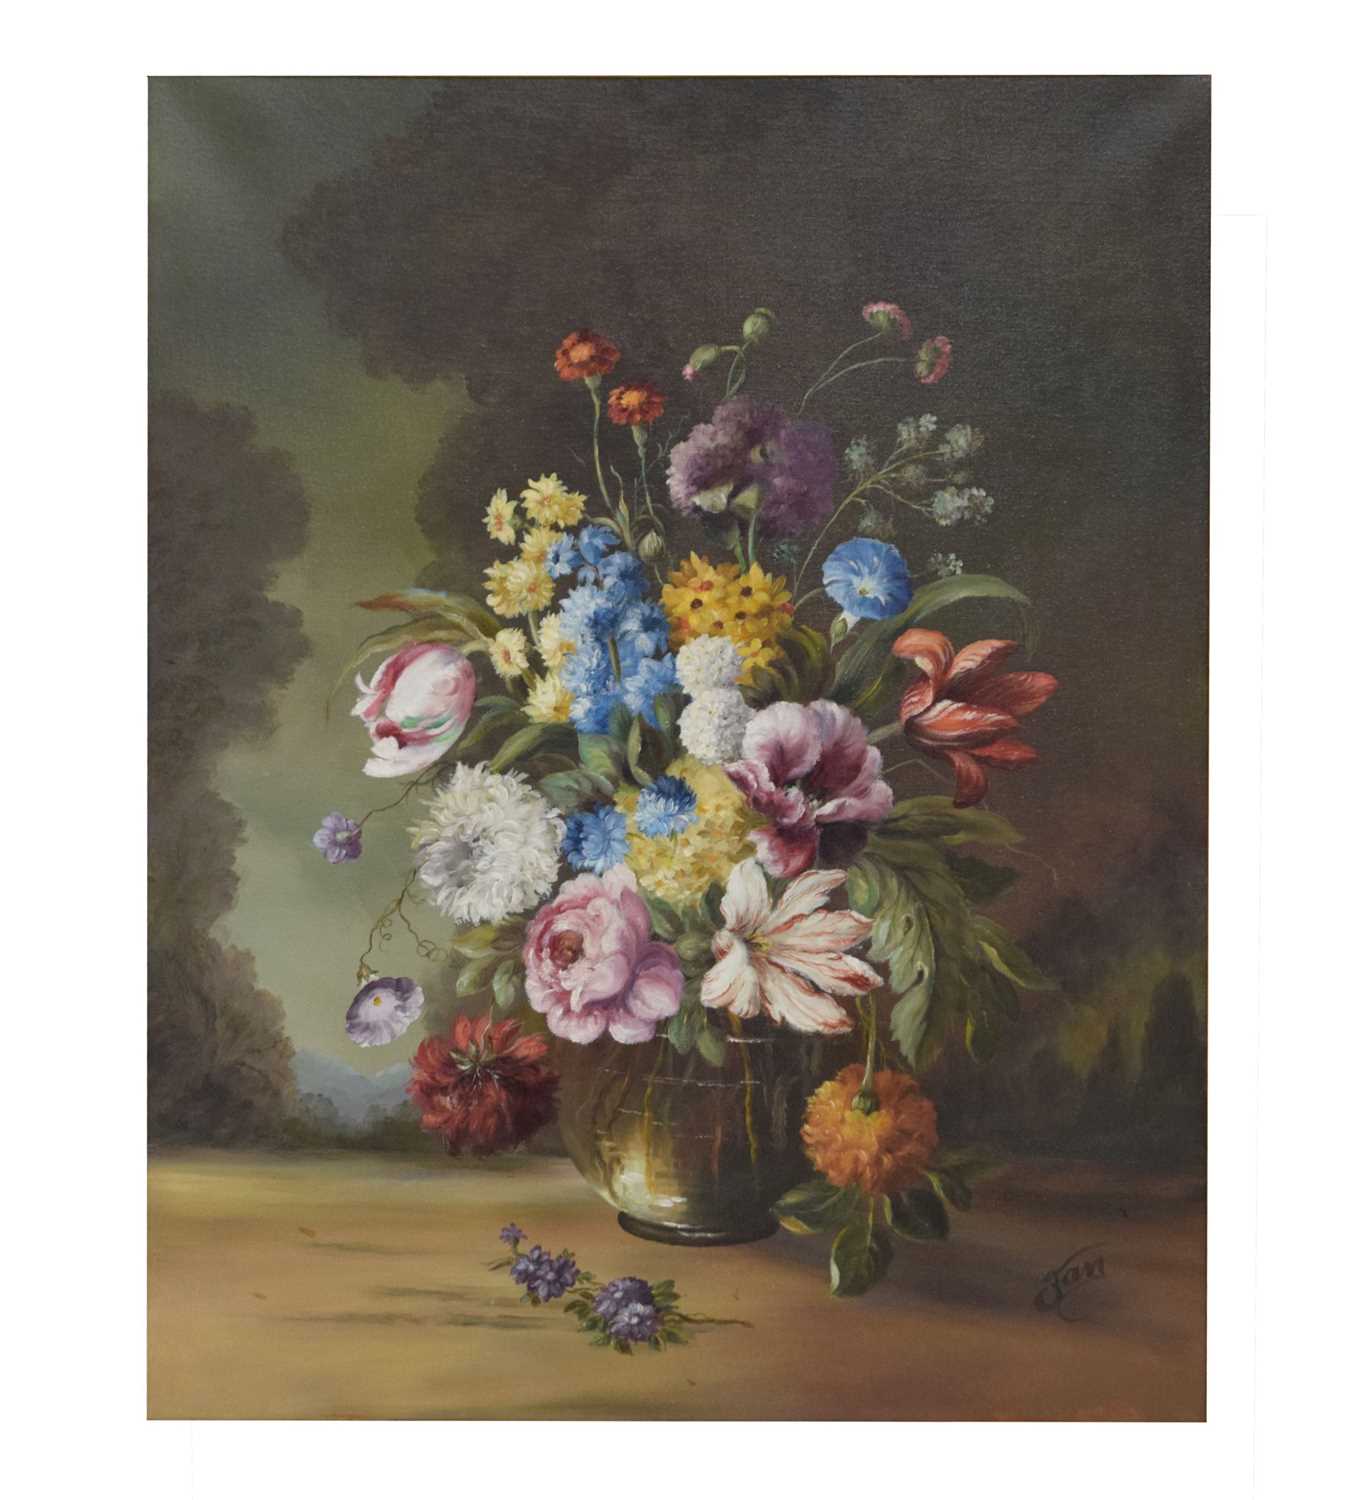 20th century oil on canvas - Still life with flowers